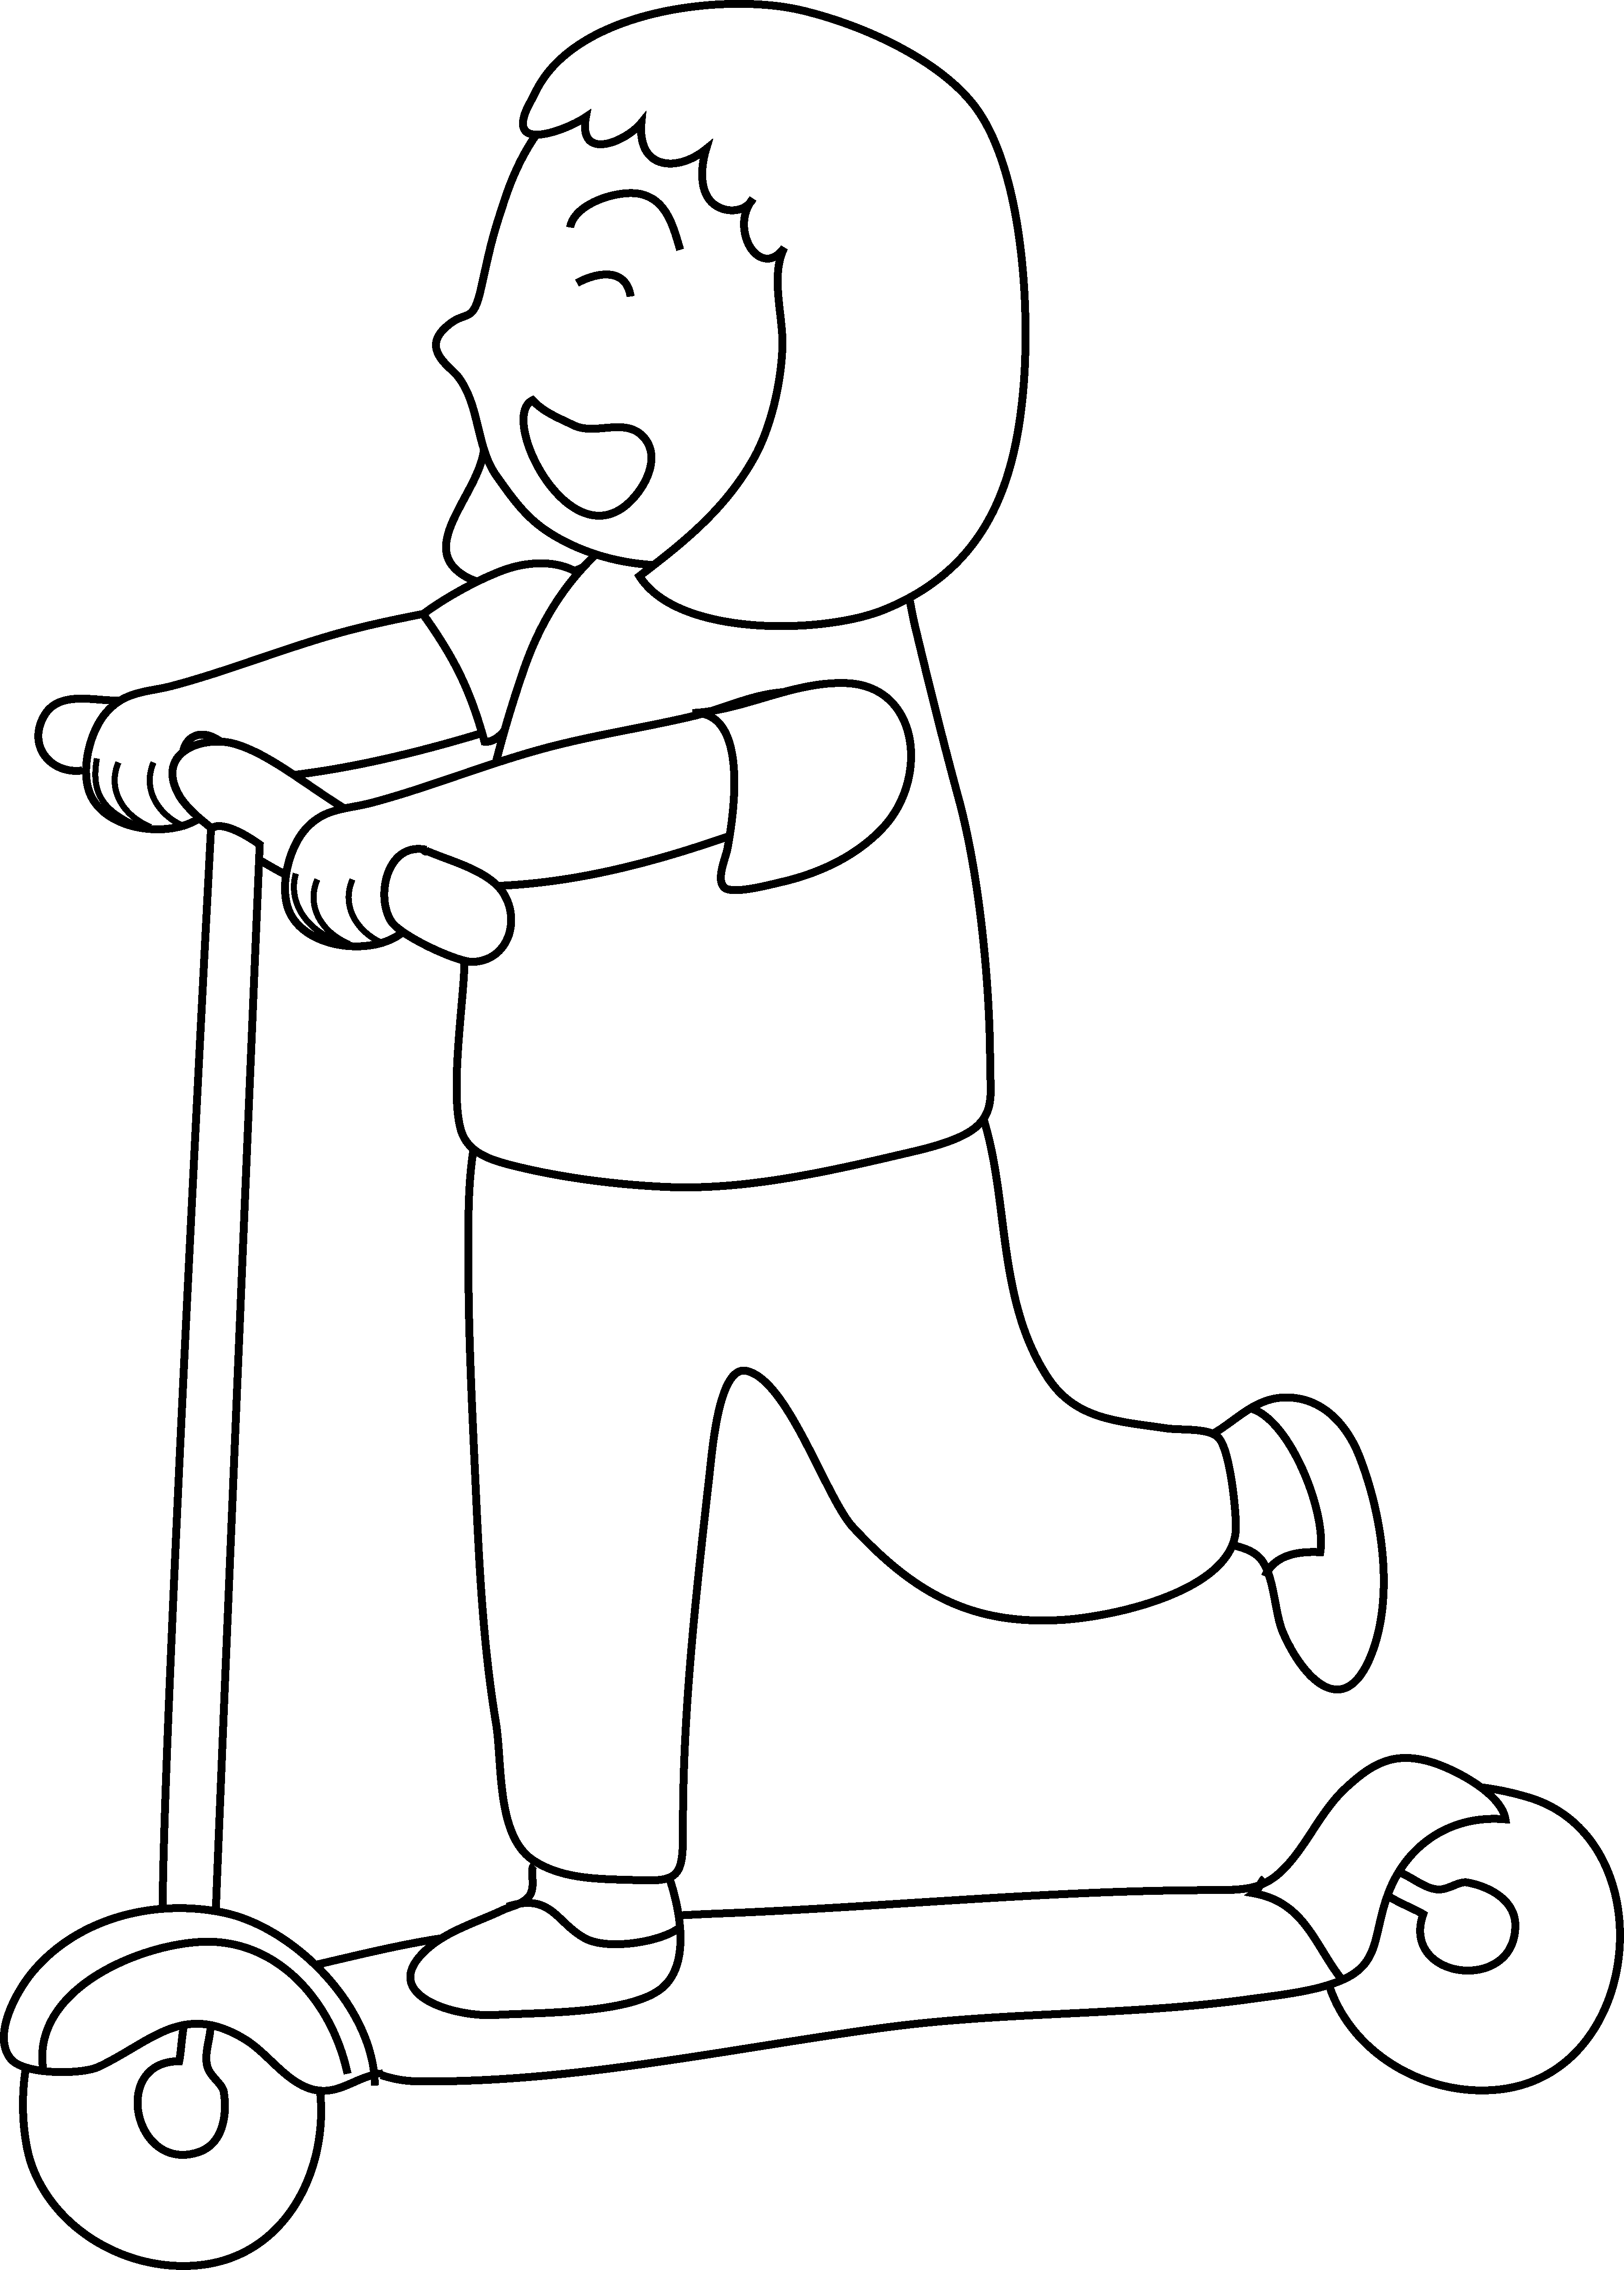 Little Girl on Scooter Coloring Page - Free Clip Art